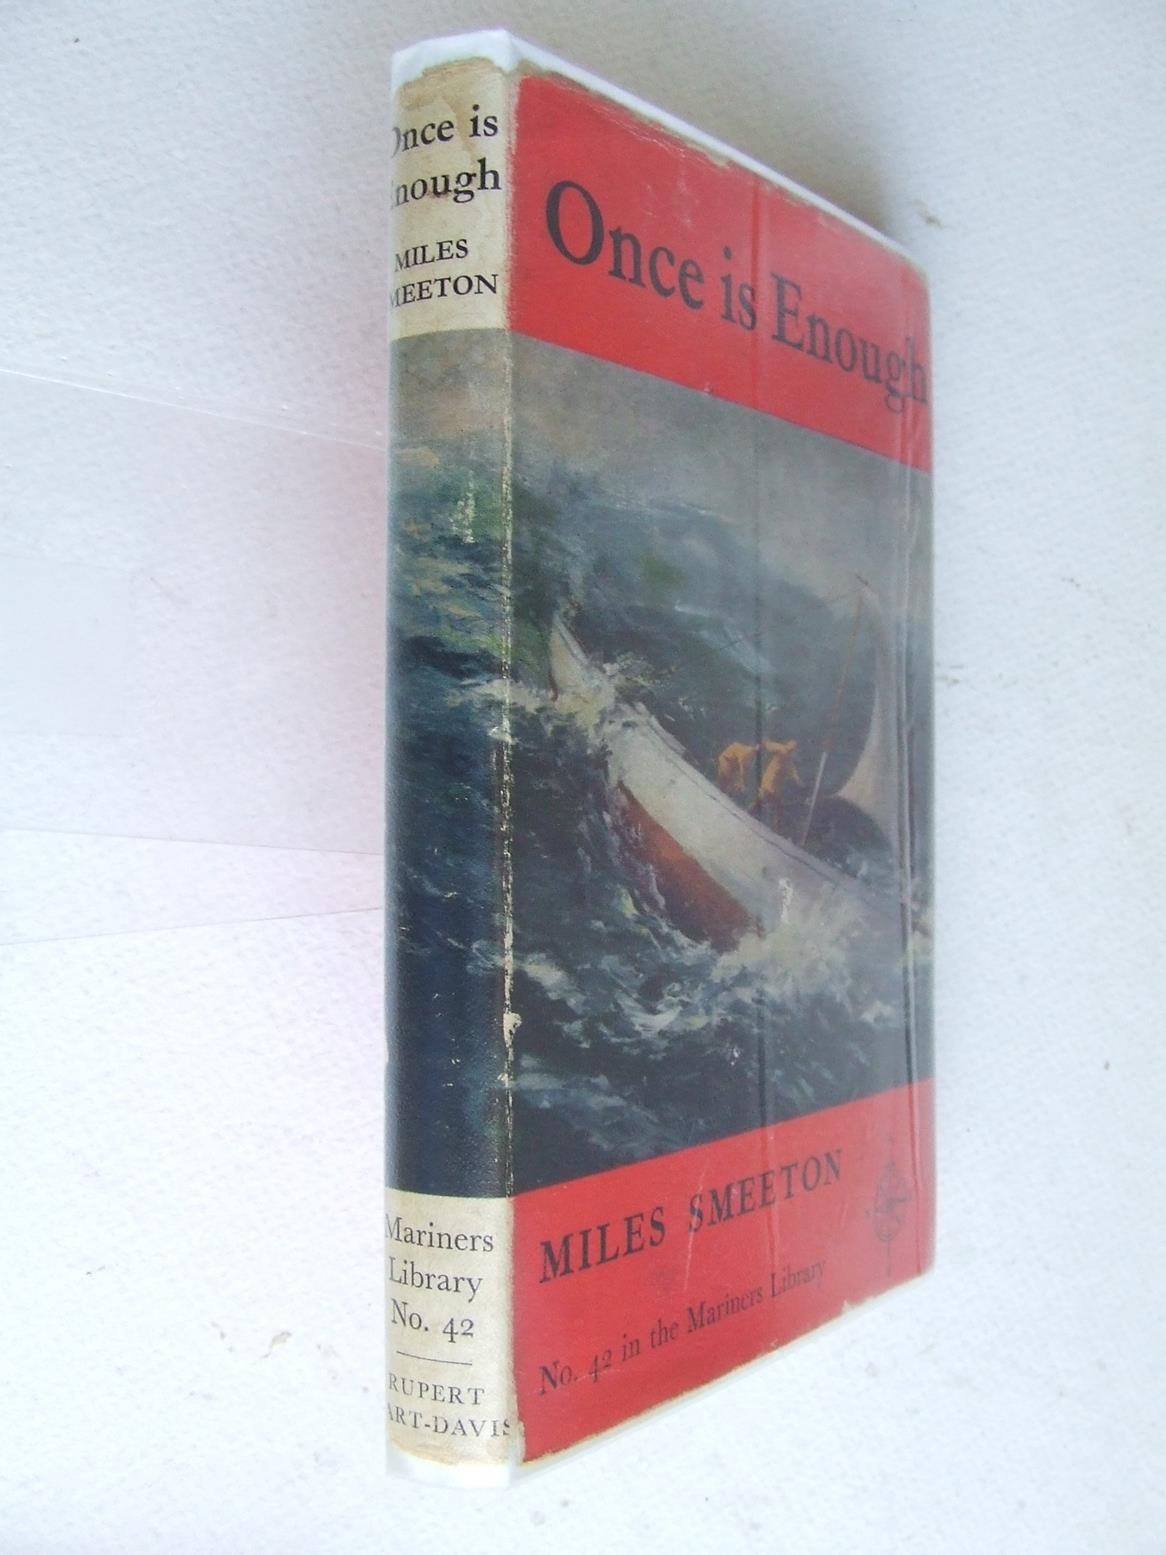 Once is Enough [Mariners Library no. 42]